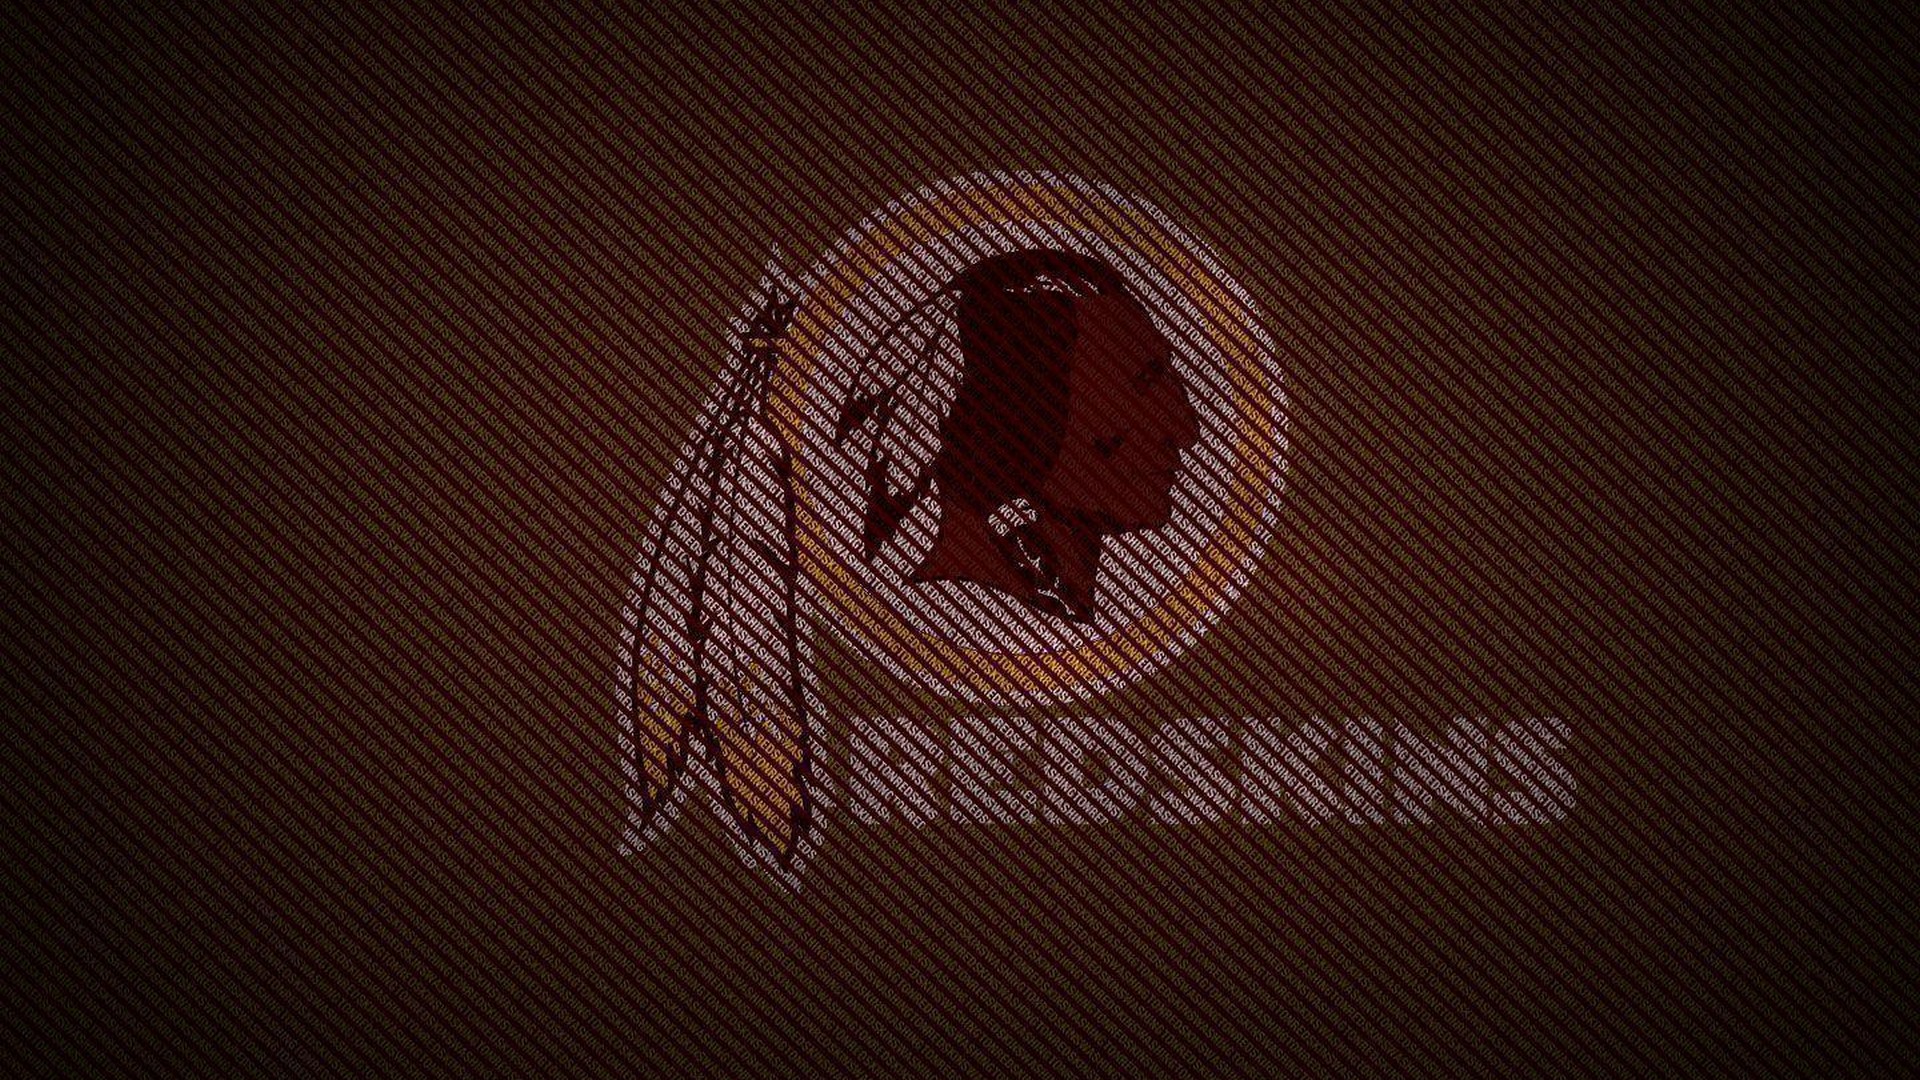 Washington Redskins Wallpaper for Computer With high-resolution 1920X1080 pixel. Download and set as wallpaper for Desktop Computer, Apple iPhone X, XS Max, XR, 8, 7, 6, SE, iPad, Android